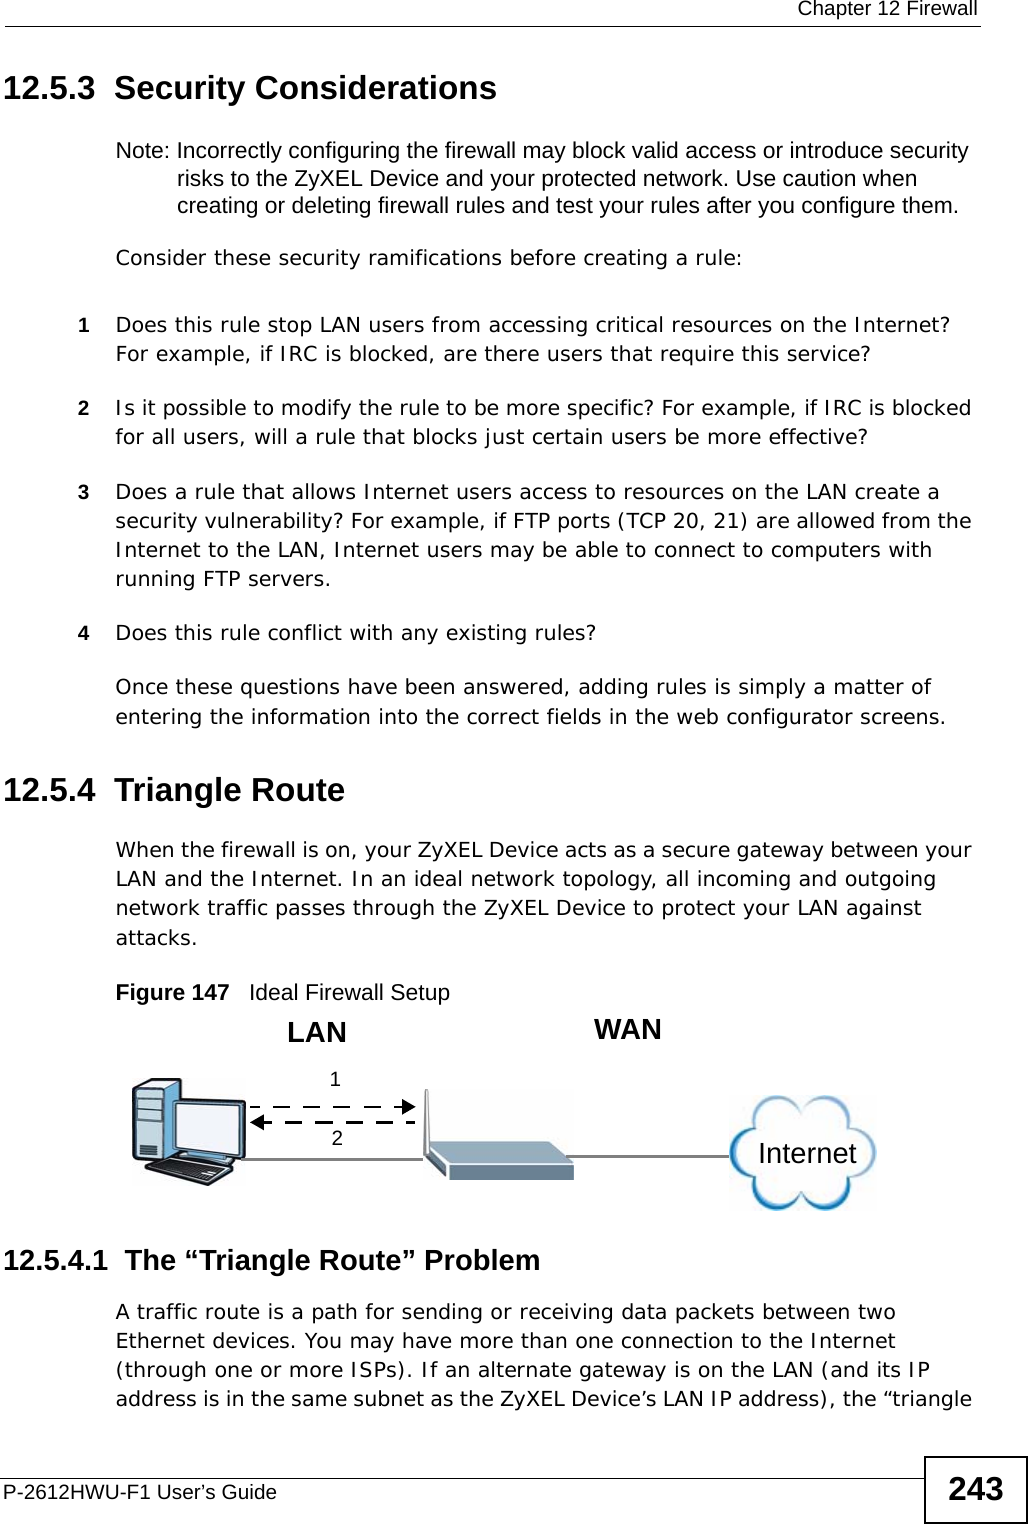  Chapter 12 FirewallP-2612HWU-F1 User’s Guide 24312.5.3  Security ConsiderationsNote: Incorrectly configuring the firewall may block valid access or introduce security risks to the ZyXEL Device and your protected network. Use caution when creating or deleting firewall rules and test your rules after you configure them.Consider these security ramifications before creating a rule:1Does this rule stop LAN users from accessing critical resources on the Internet? For example, if IRC is blocked, are there users that require this service?2Is it possible to modify the rule to be more specific? For example, if IRC is blocked for all users, will a rule that blocks just certain users be more effective?3Does a rule that allows Internet users access to resources on the LAN create a security vulnerability? For example, if FTP ports (TCP 20, 21) are allowed from the Internet to the LAN, Internet users may be able to connect to computers with running FTP servers.4Does this rule conflict with any existing rules?Once these questions have been answered, adding rules is simply a matter of entering the information into the correct fields in the web configurator screens.12.5.4  Triangle RouteWhen the firewall is on, your ZyXEL Device acts as a secure gateway between your LAN and the Internet. In an ideal network topology, all incoming and outgoing network traffic passes through the ZyXEL Device to protect your LAN against attacks.Figure 147   Ideal Firewall Setup12.5.4.1  The “Triangle Route” ProblemA traffic route is a path for sending or receiving data packets between two Ethernet devices. You may have more than one connection to the Internet (through one or more ISPs). If an alternate gateway is on the LAN (and its IP address is in the same subnet as the ZyXEL Device’s LAN IP address), the “triangle 12WANLANInternet